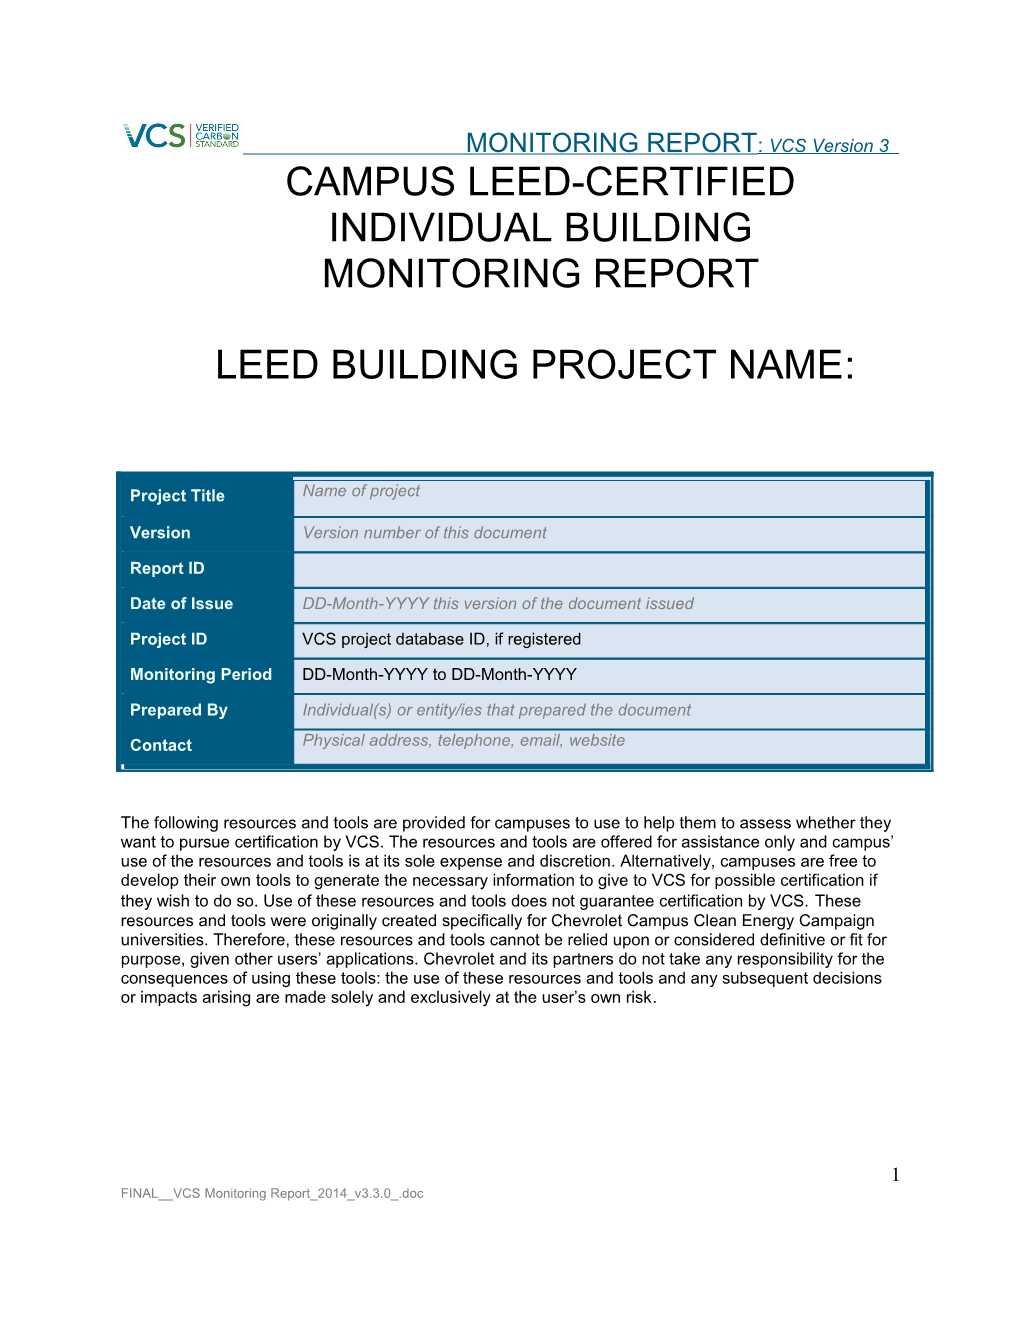 Campus Leed-Certified